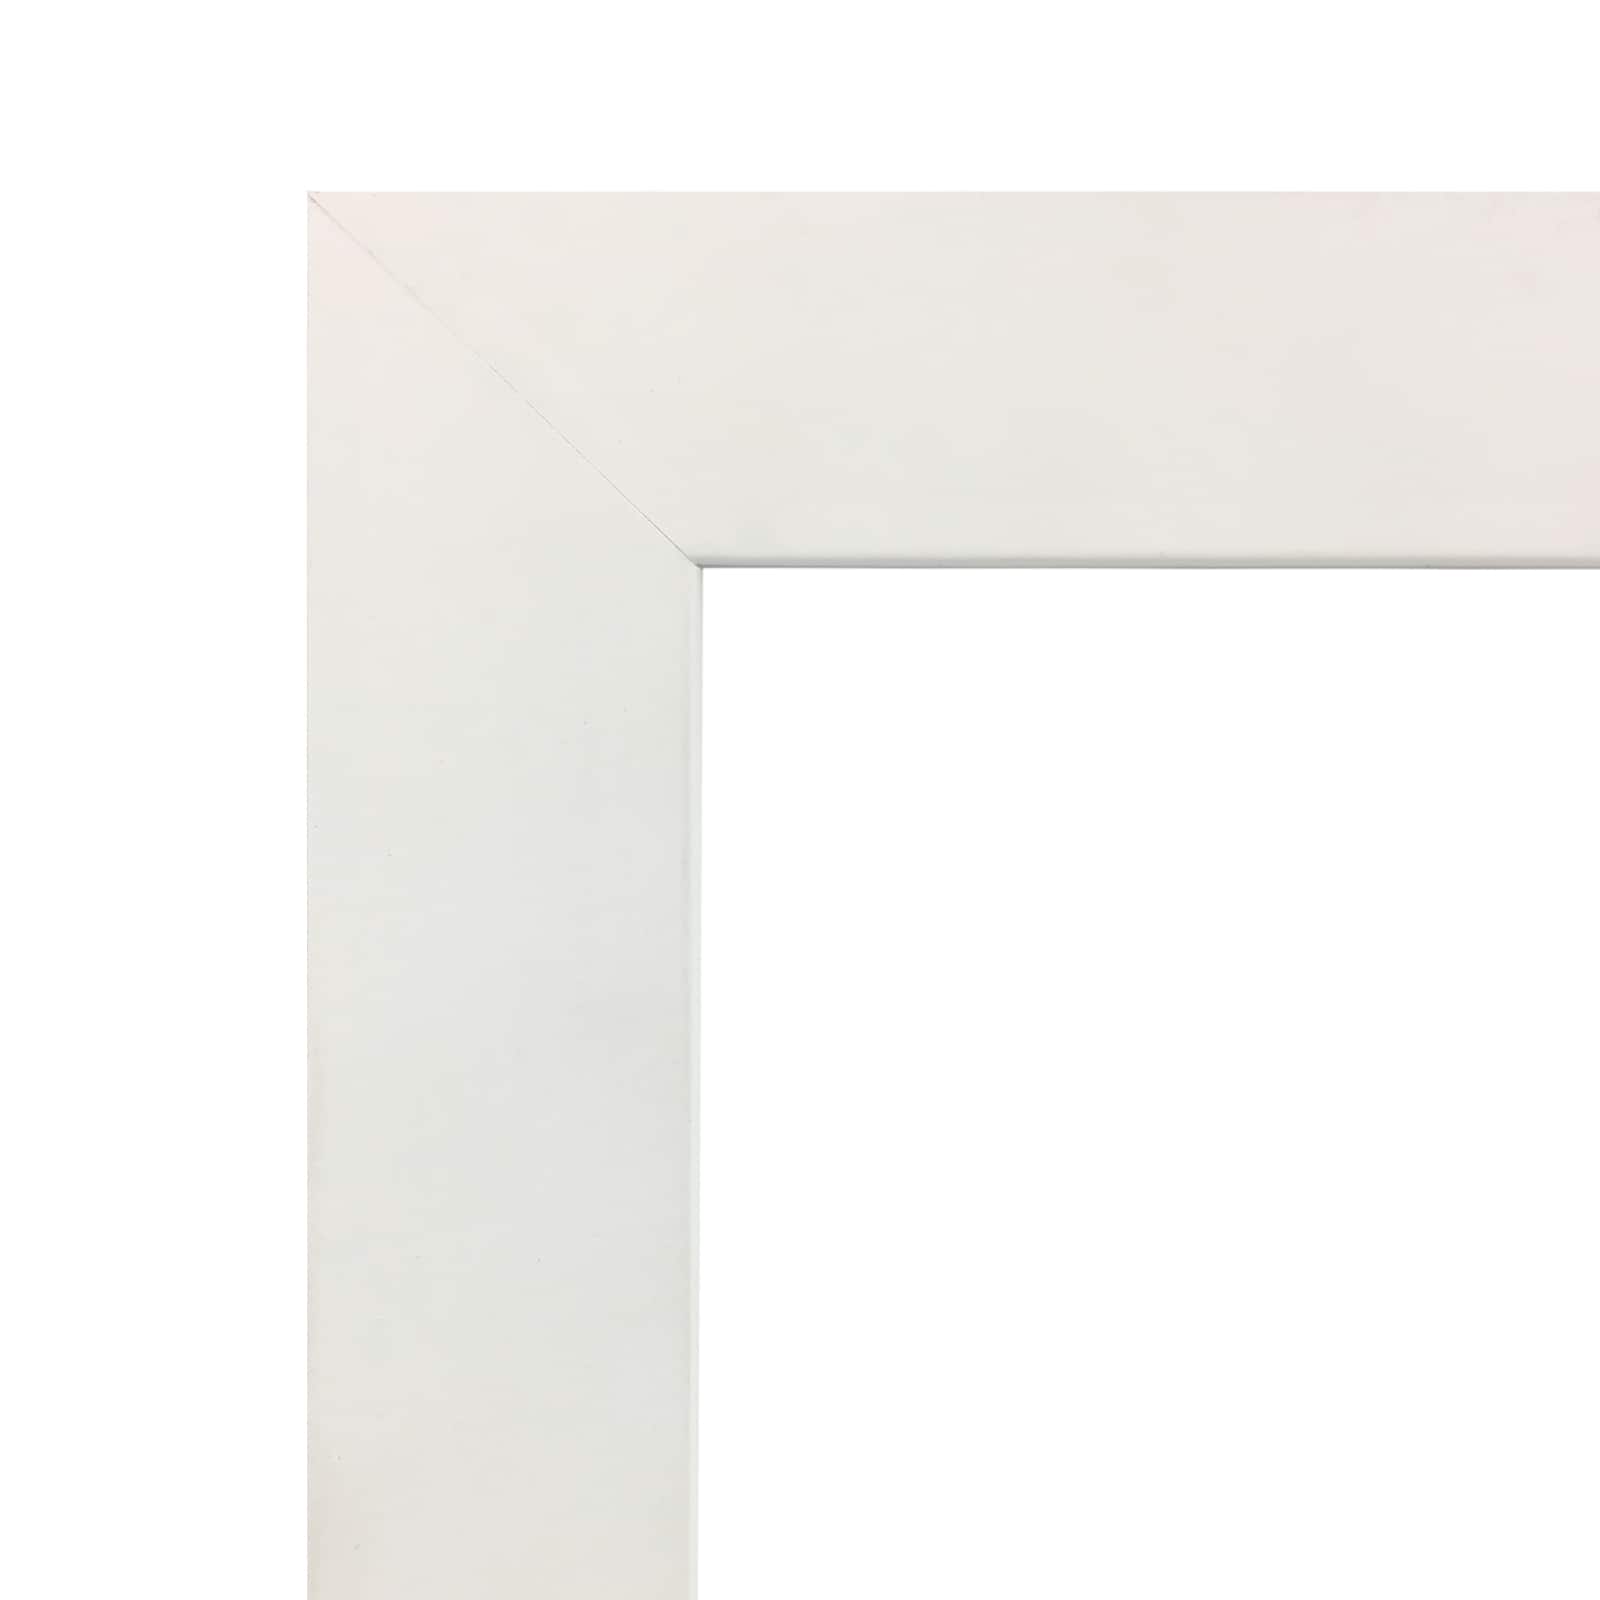 3 Opening 4&#x22; x 6&#x22; White Flat Top Simply Essentials&#x2122; Collage Frame by Studio D&#xE9;cor&#xAE;